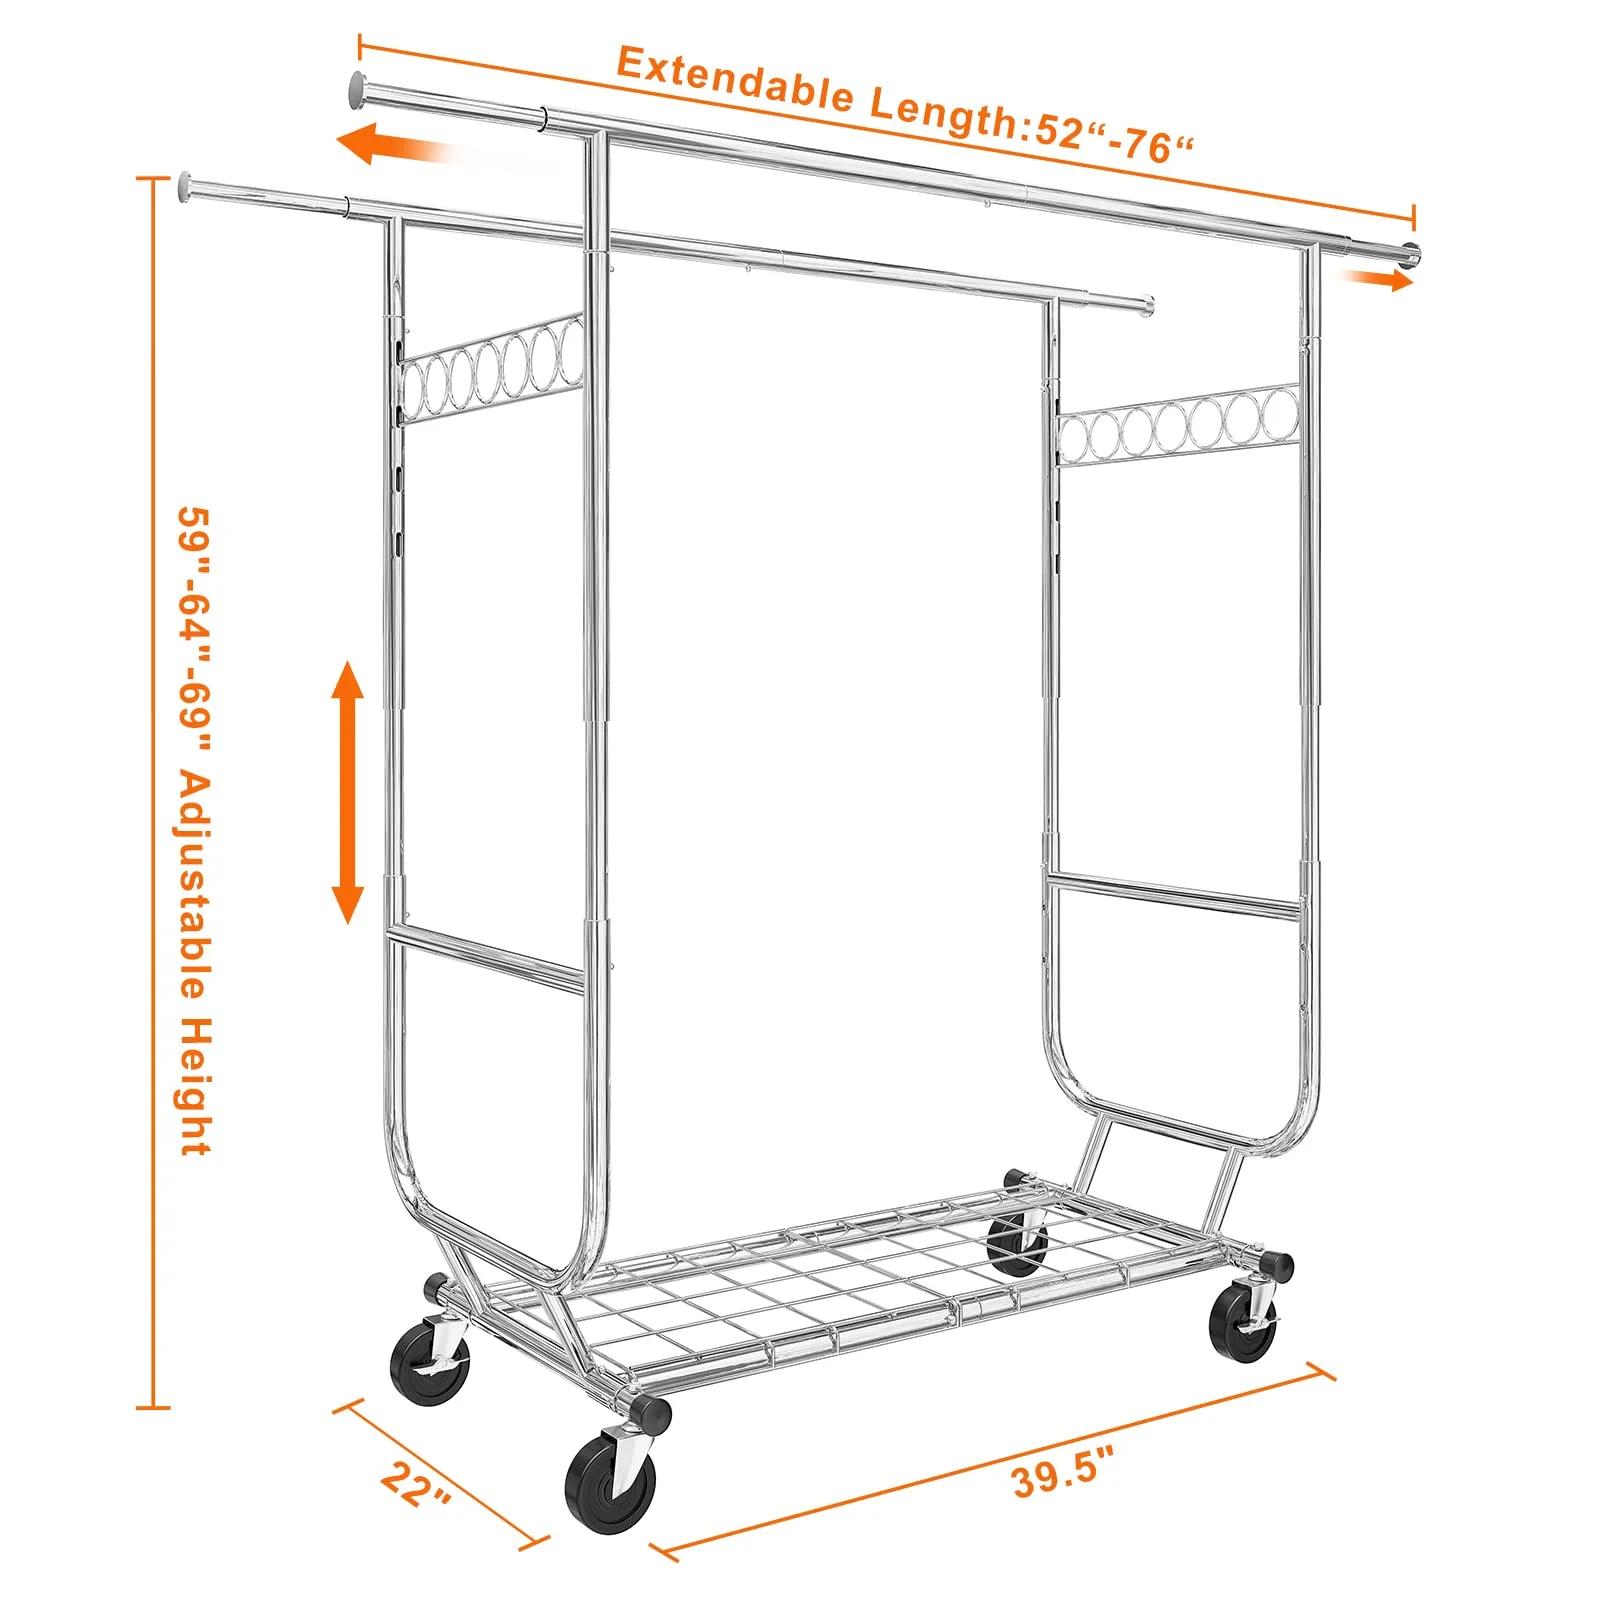 https://ae01.alicdn.com/kf/Sc77dec5d588c46b4871255f9c8f62a51R/Raybee-600LBS-Heavy-Duty-Clothes-Rack-Portable-Clothing-Racks-with-Wheels-Rolling-Commercial-Grament-Racks-for.jpg